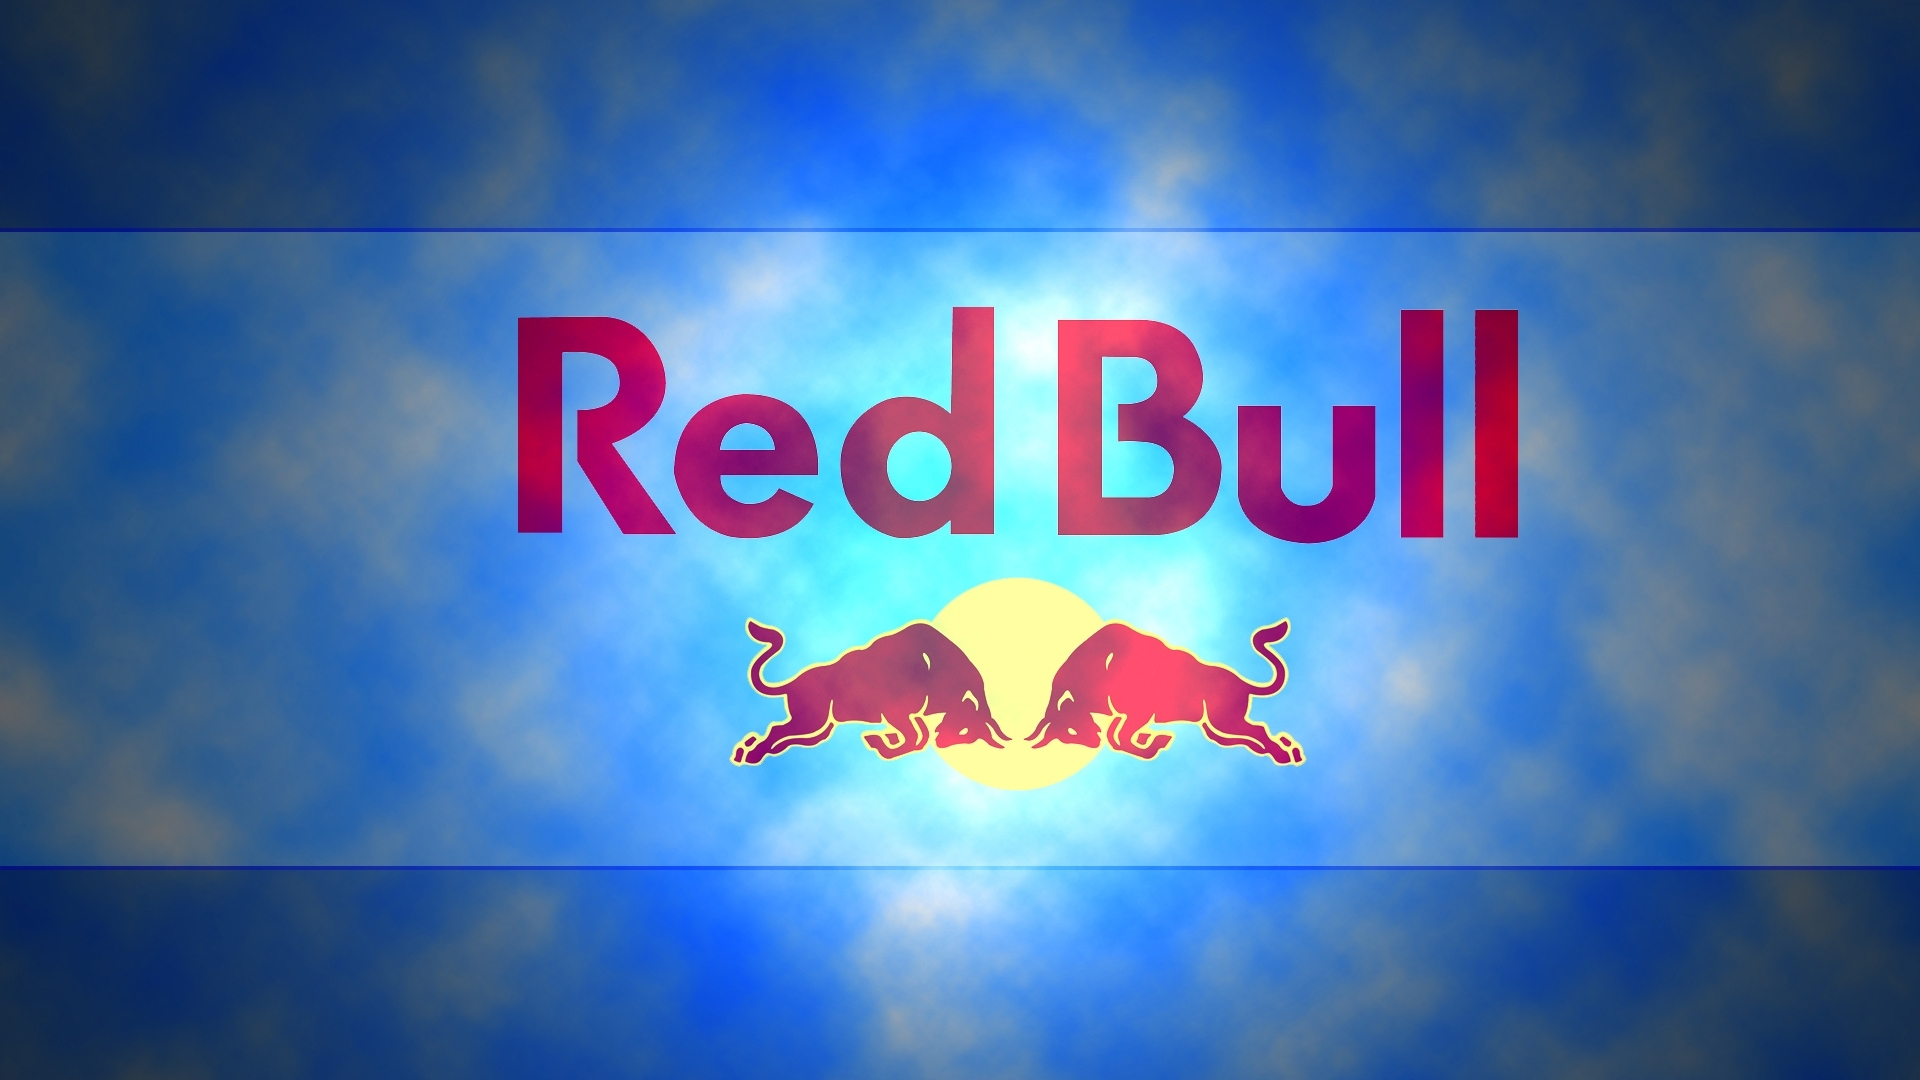 Red Bull Background